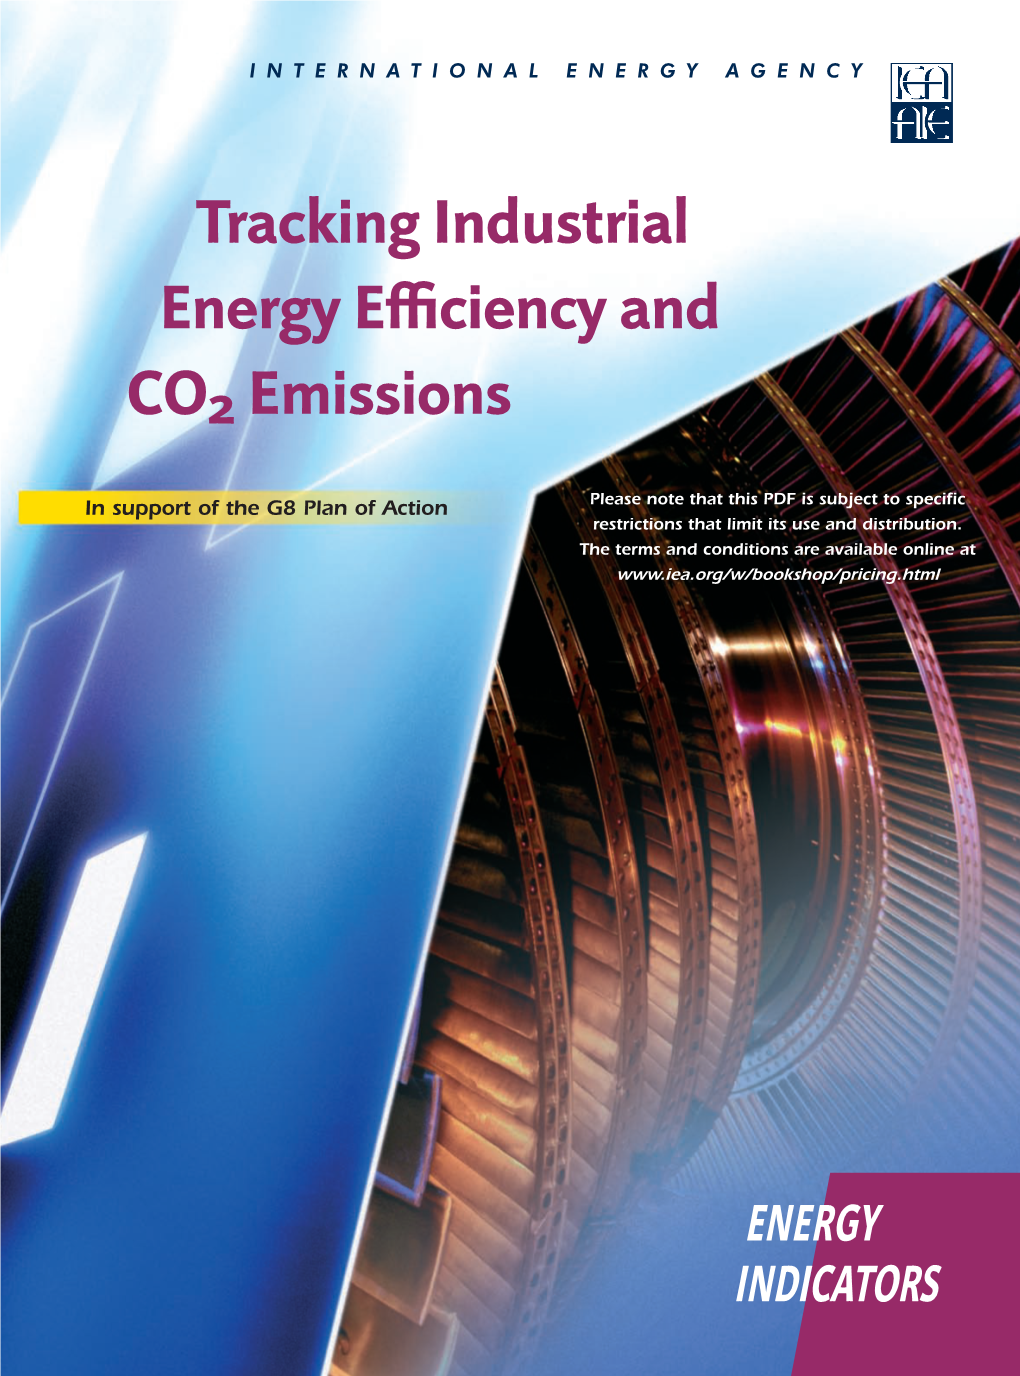 Tracking Industrial Energy Efficiency and Co2 Emissions